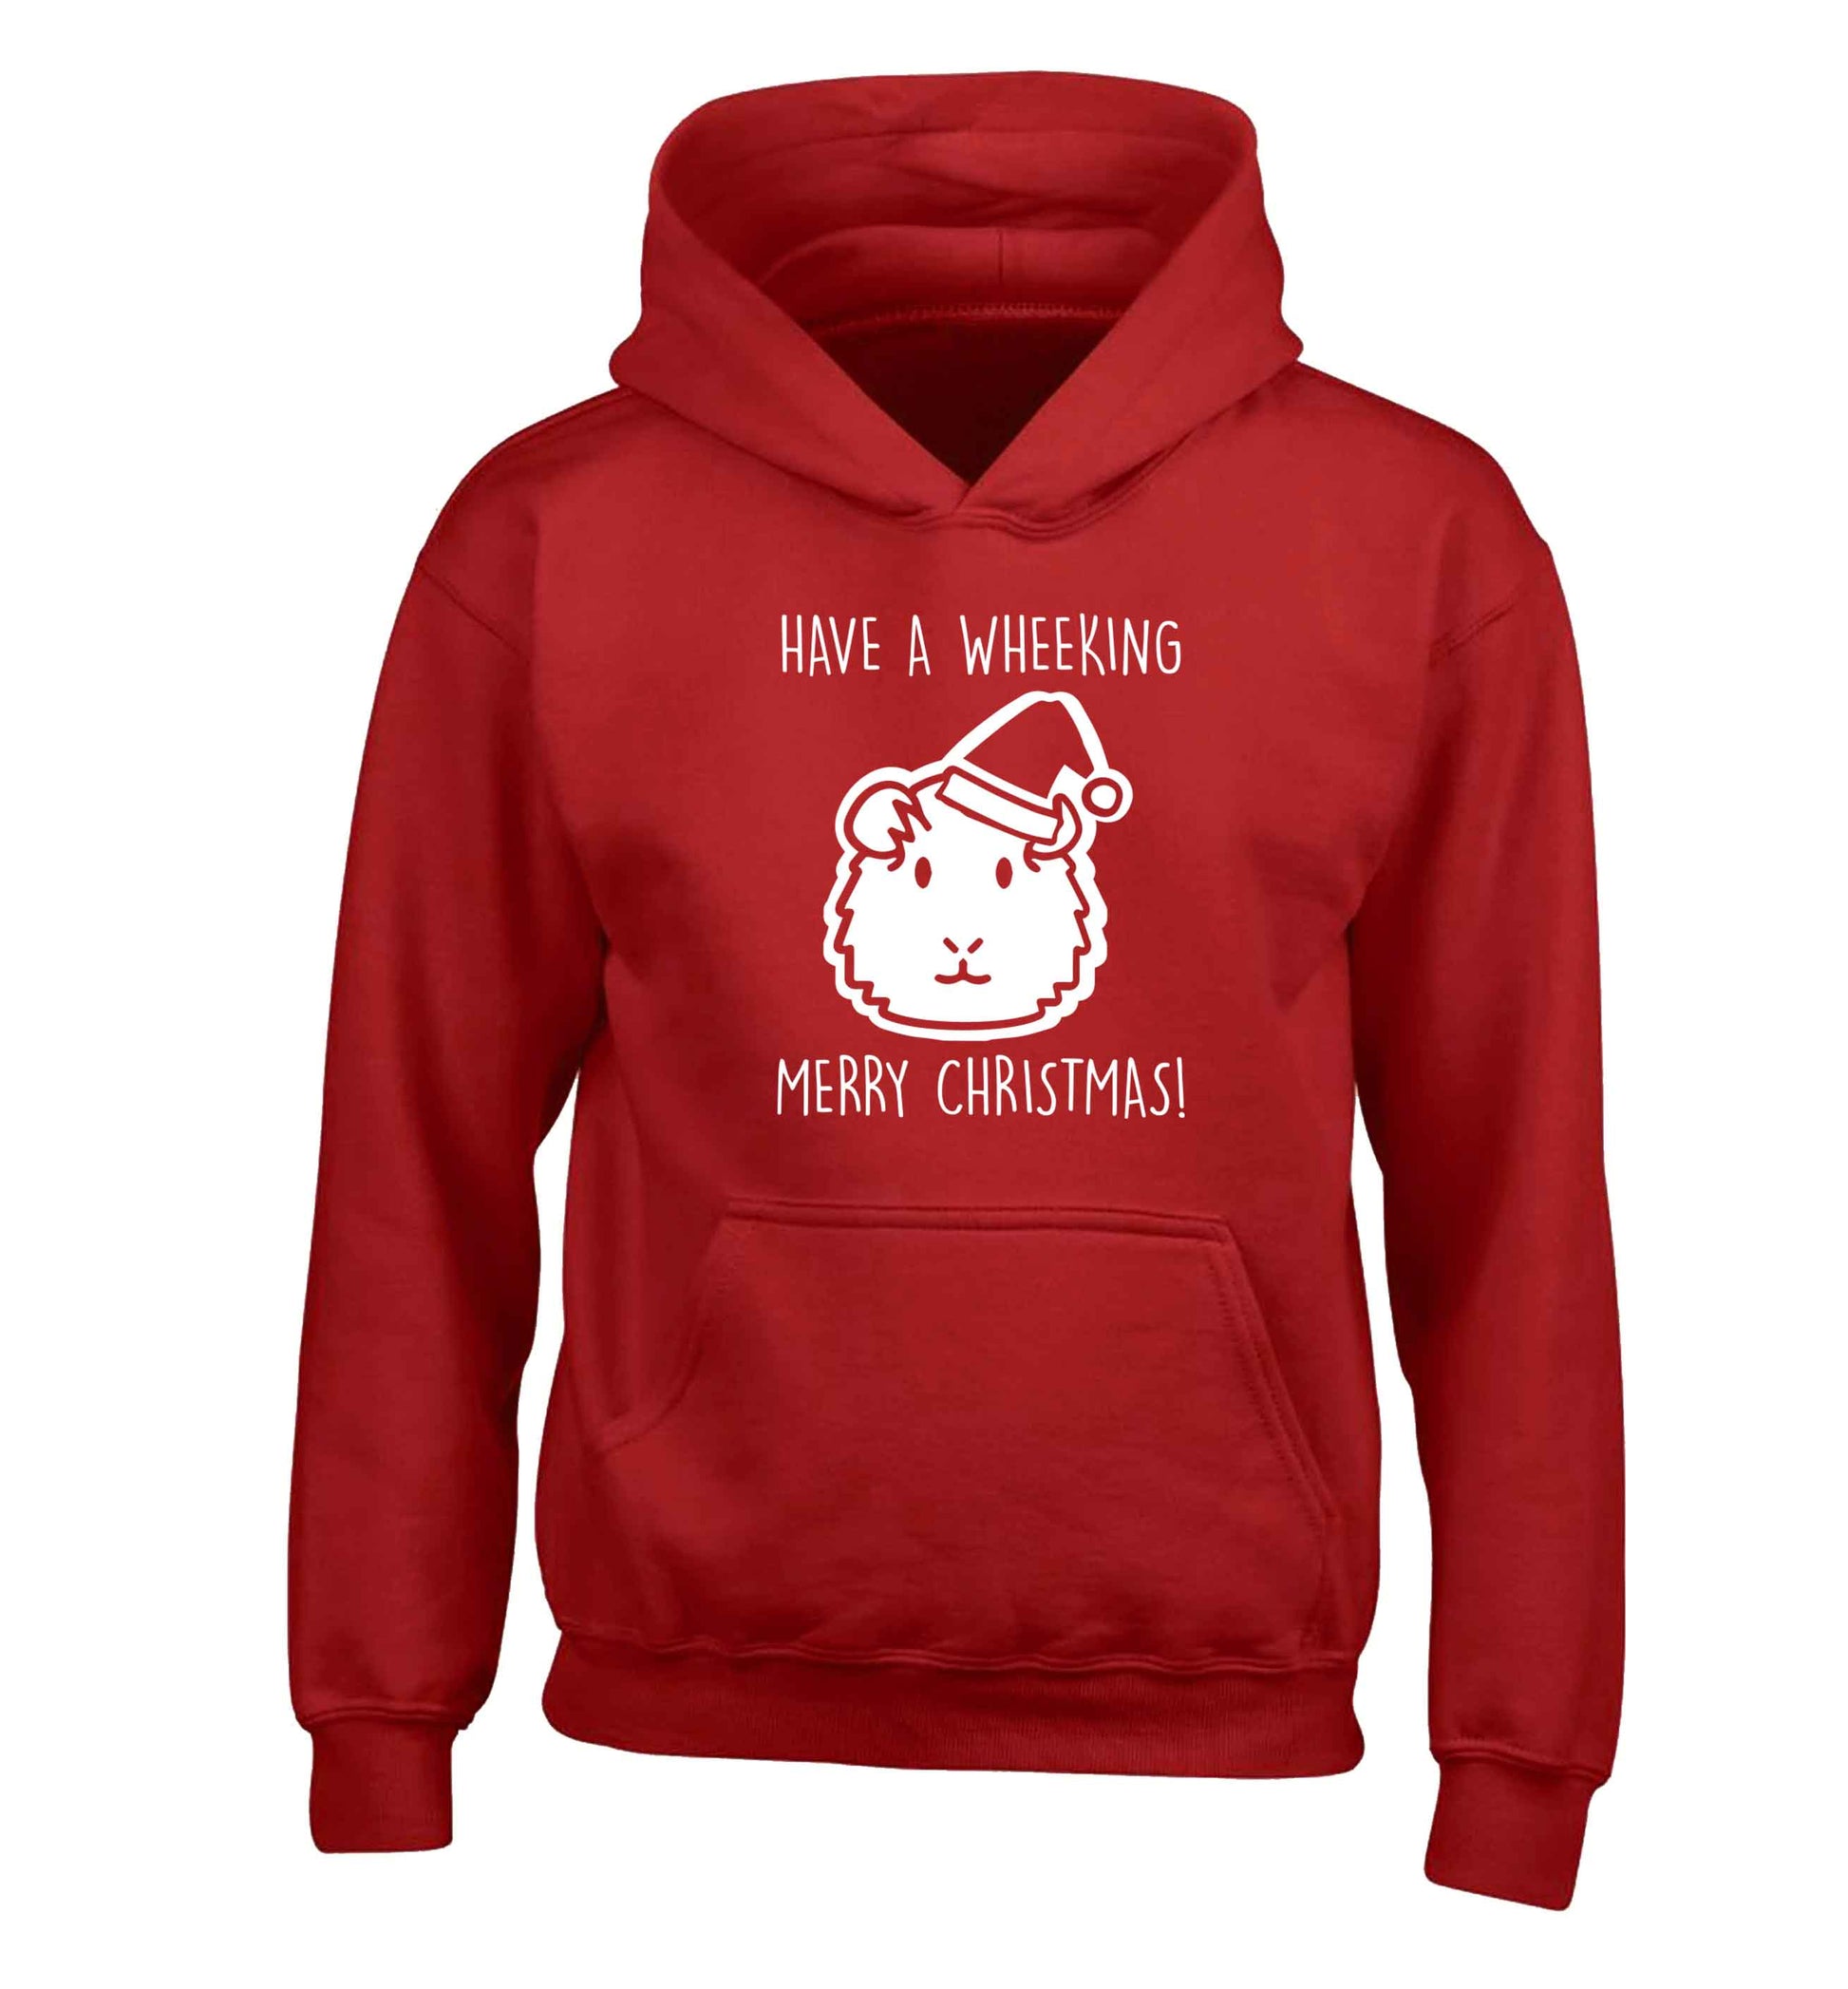 Have a wheeking merry Christmas children's red hoodie 12-13 Years